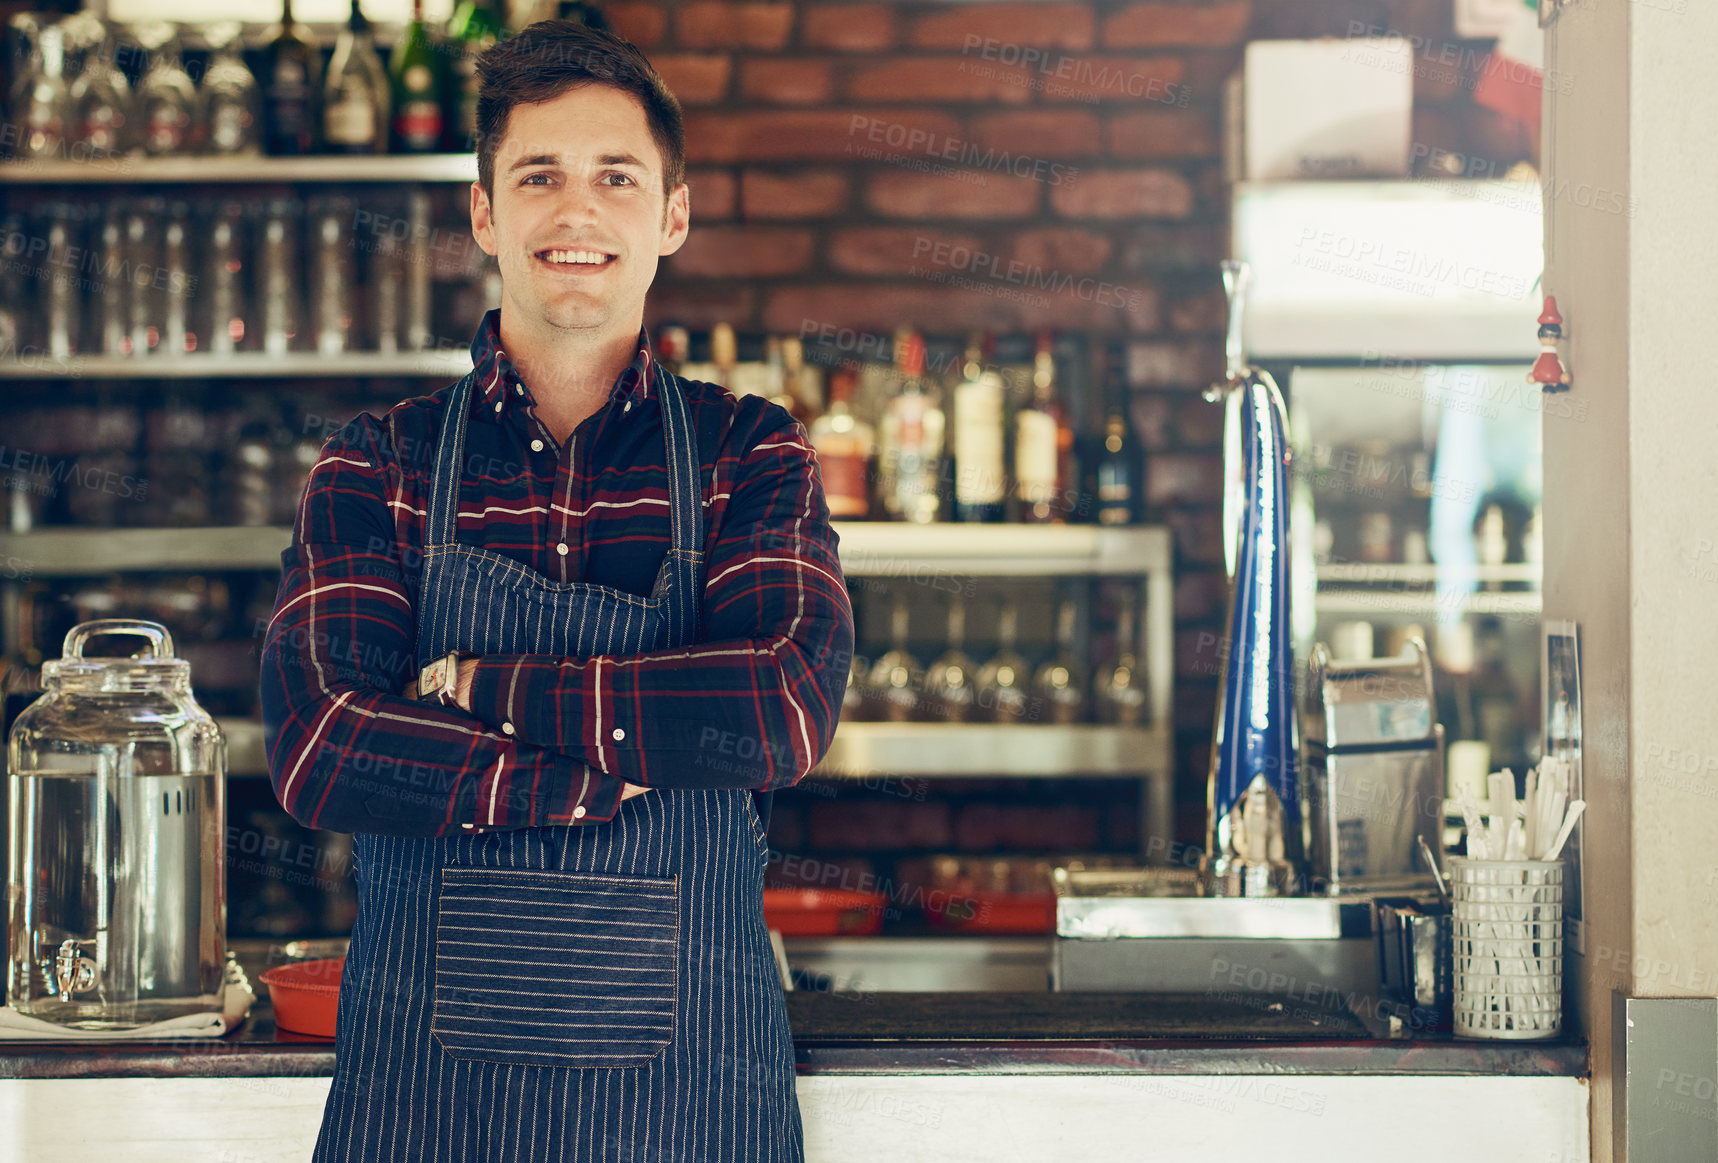 Buy stock photo Portrait of a smiling young entrepreneur standing in a small restaurant